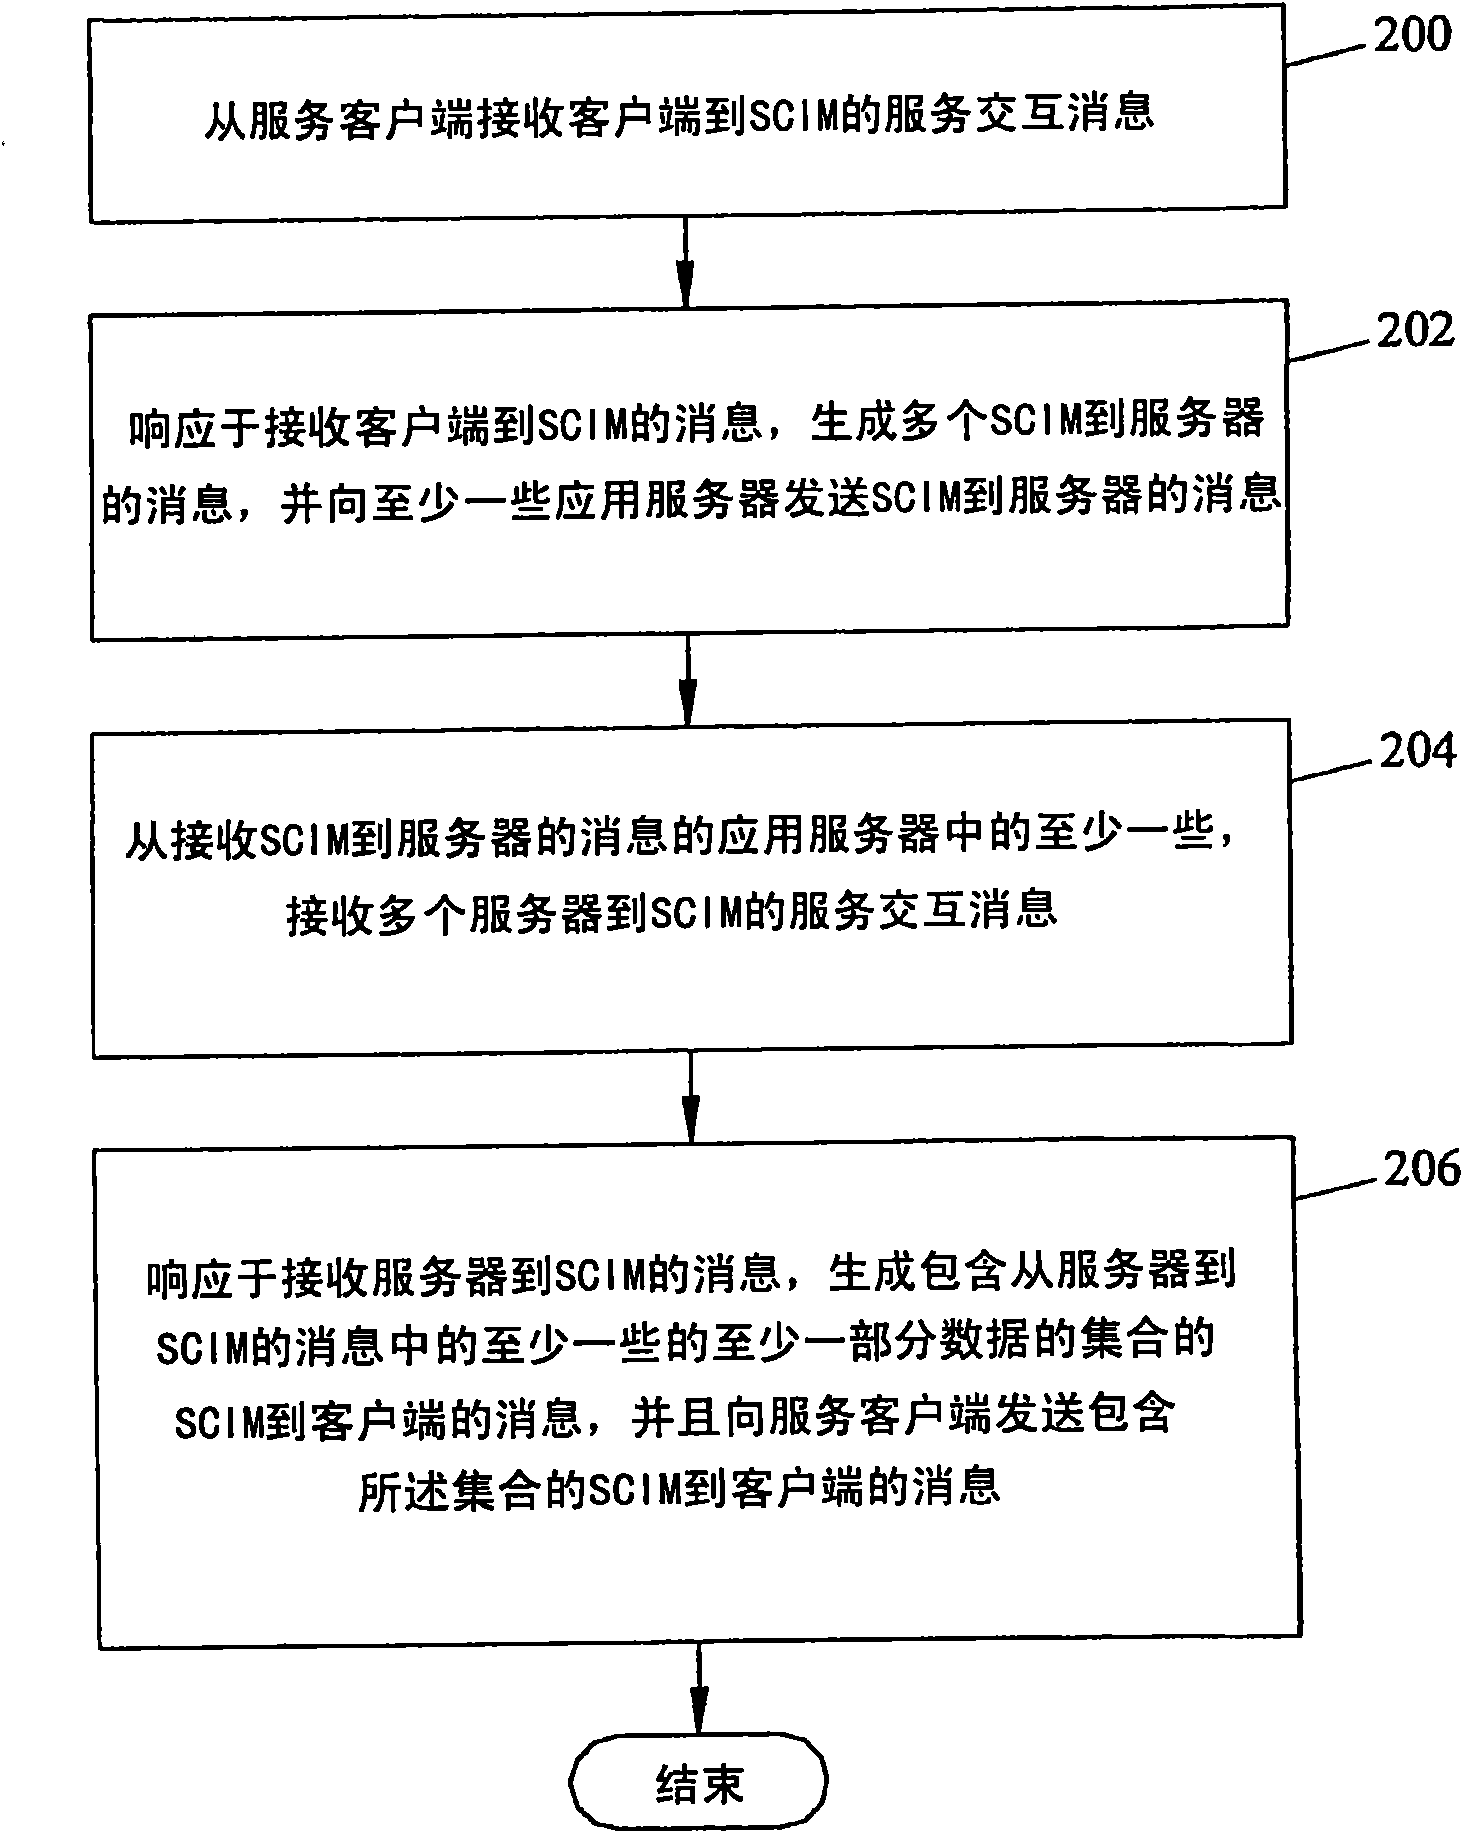 Systems, methods, and computer program products for providing service interaction and mediation in a communications network